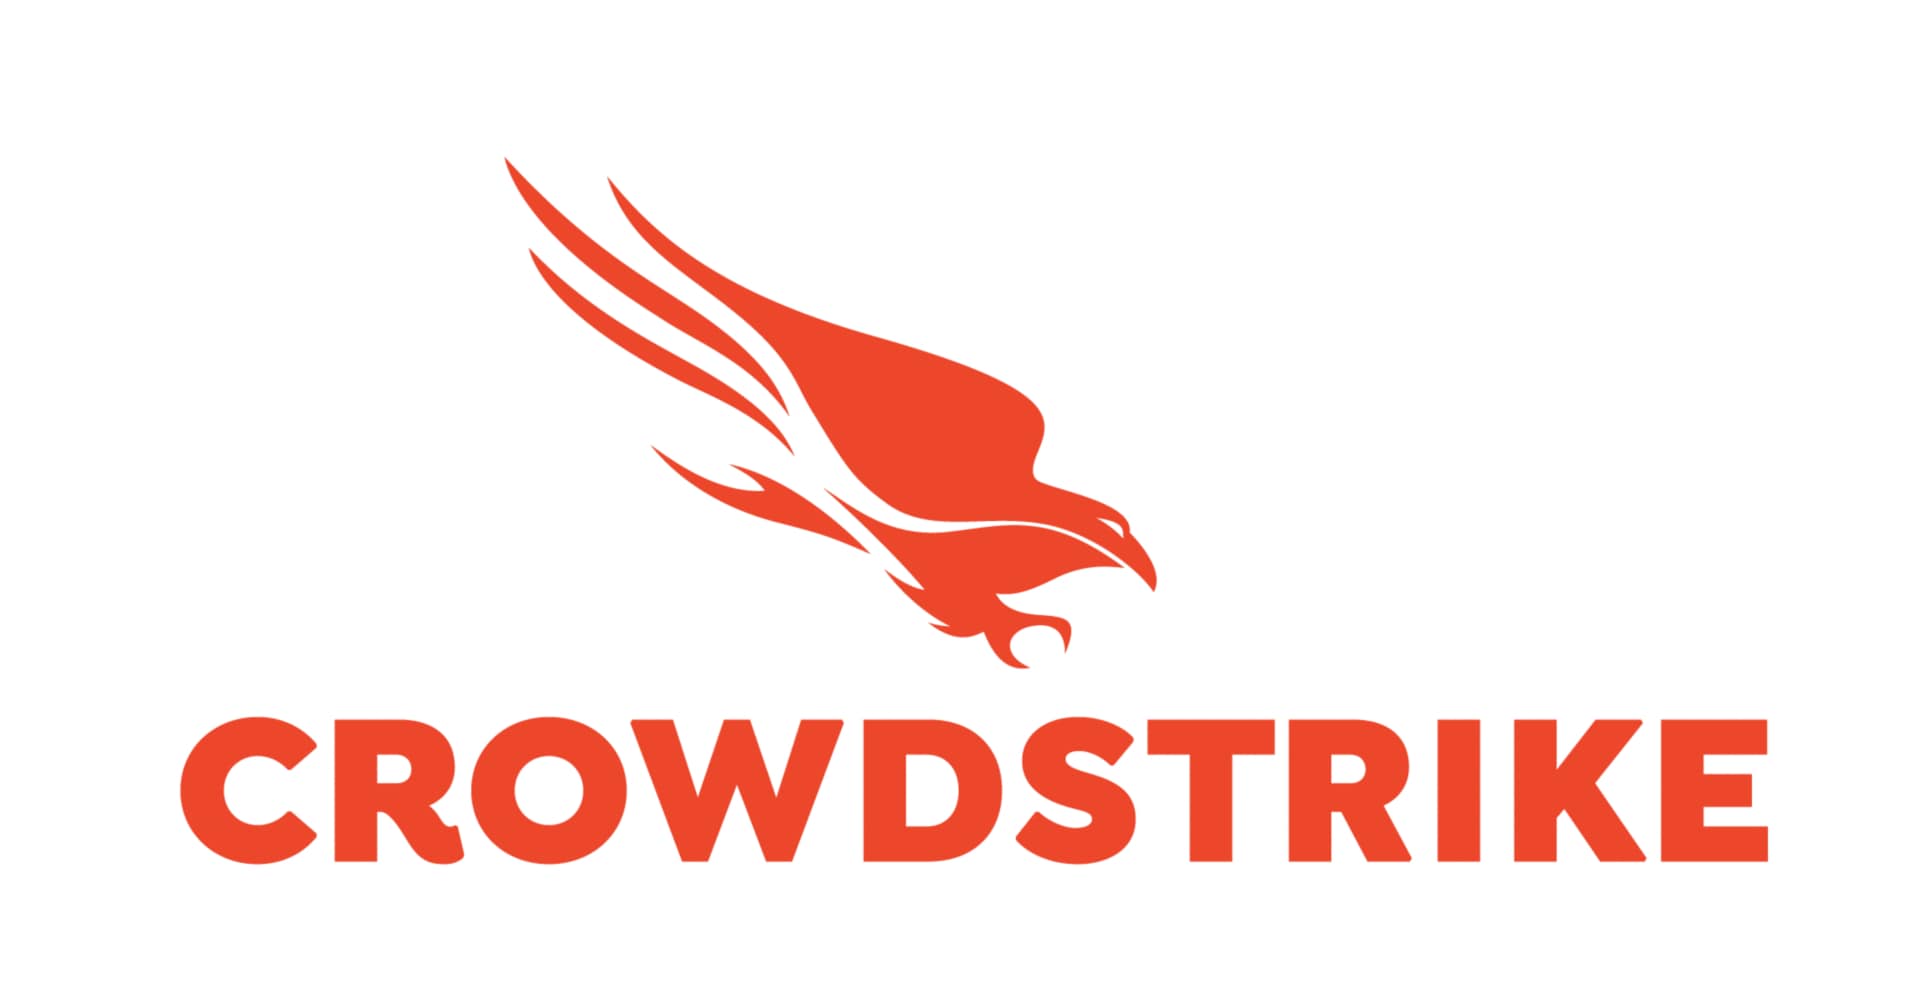 CrowdStrike 4-Month Intelligence Actor Profiles and Indicators of Compromise (IOC) Feed